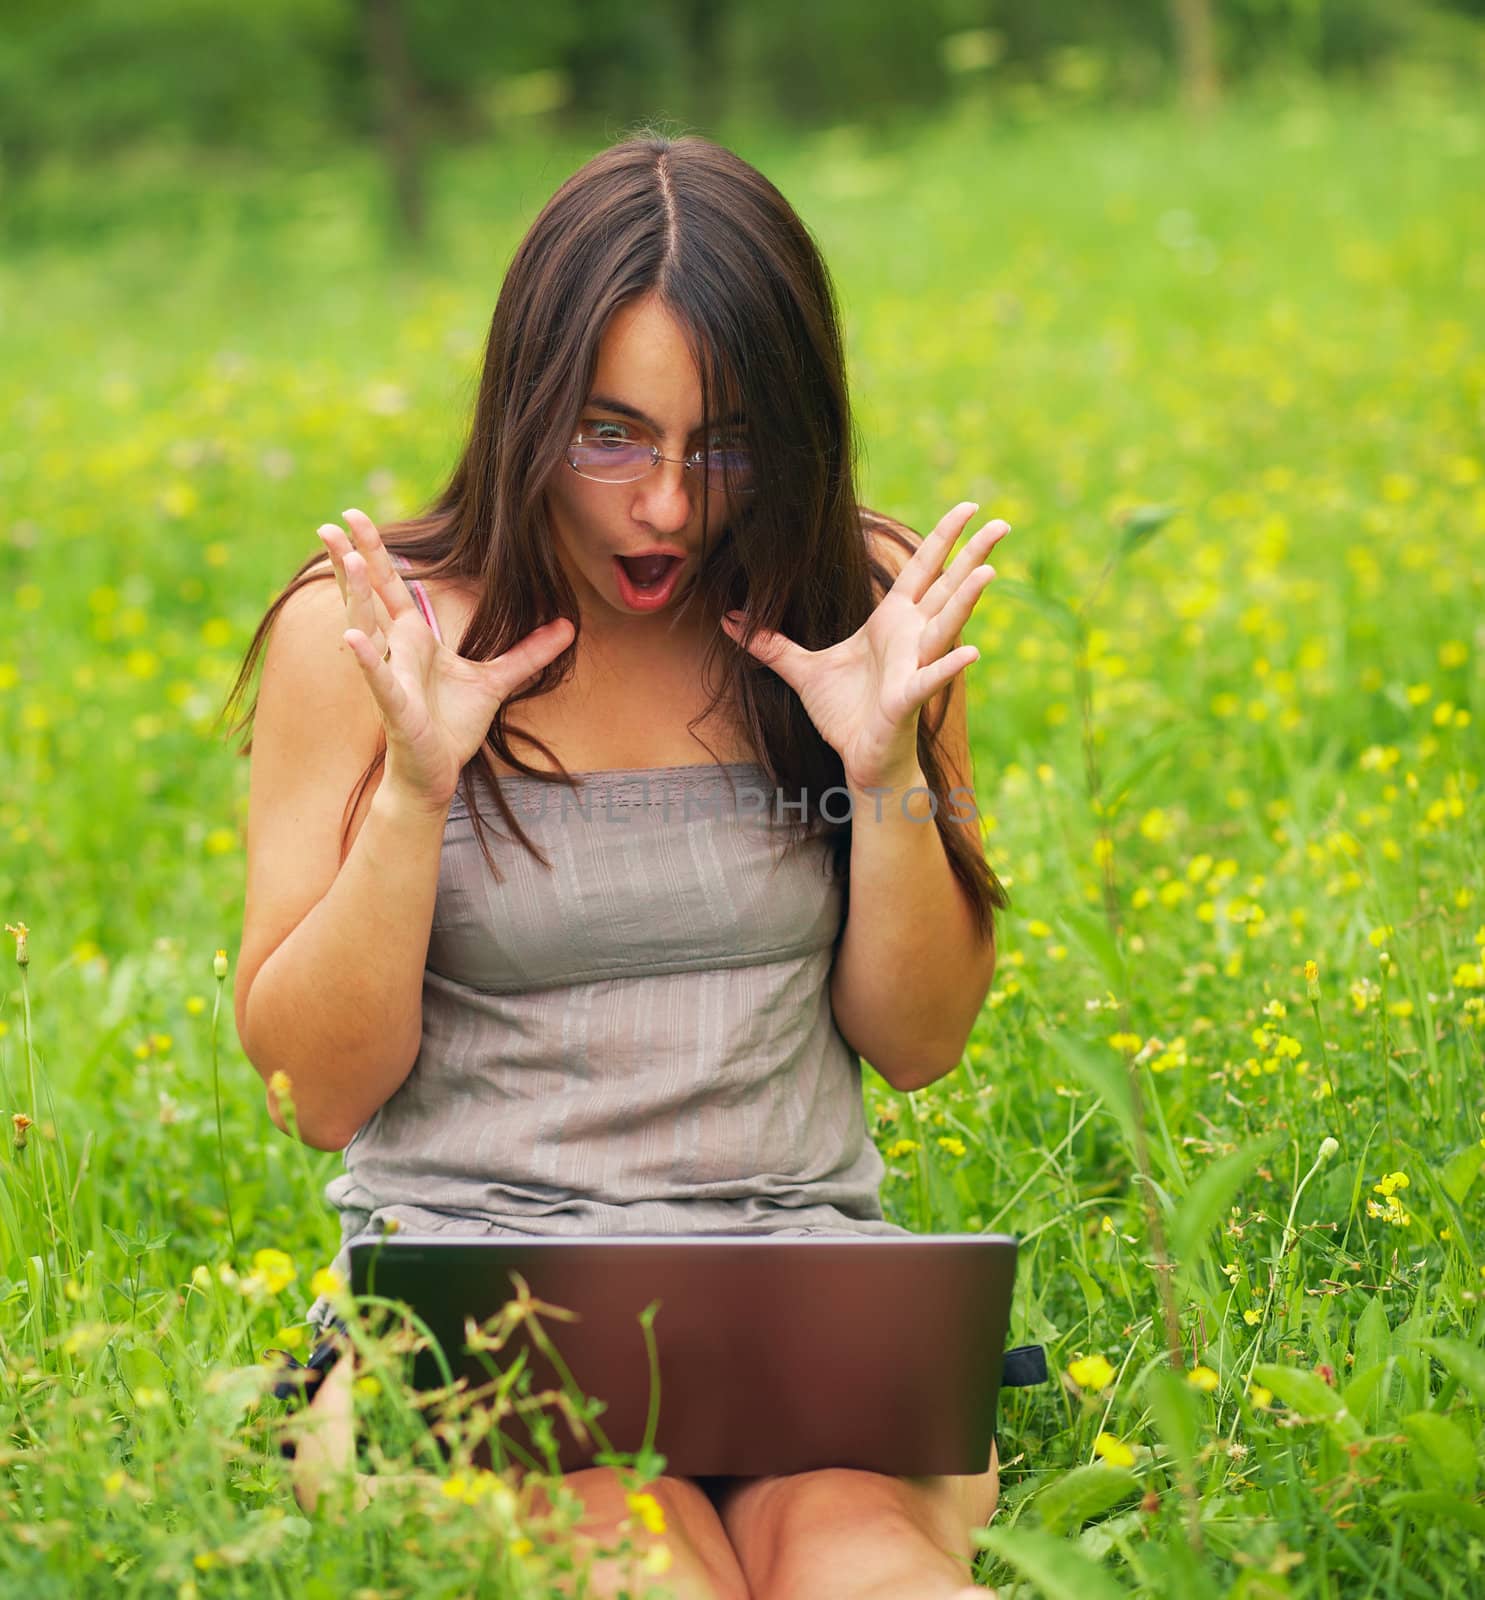 Shocked Young woman using her laptop outdoors.